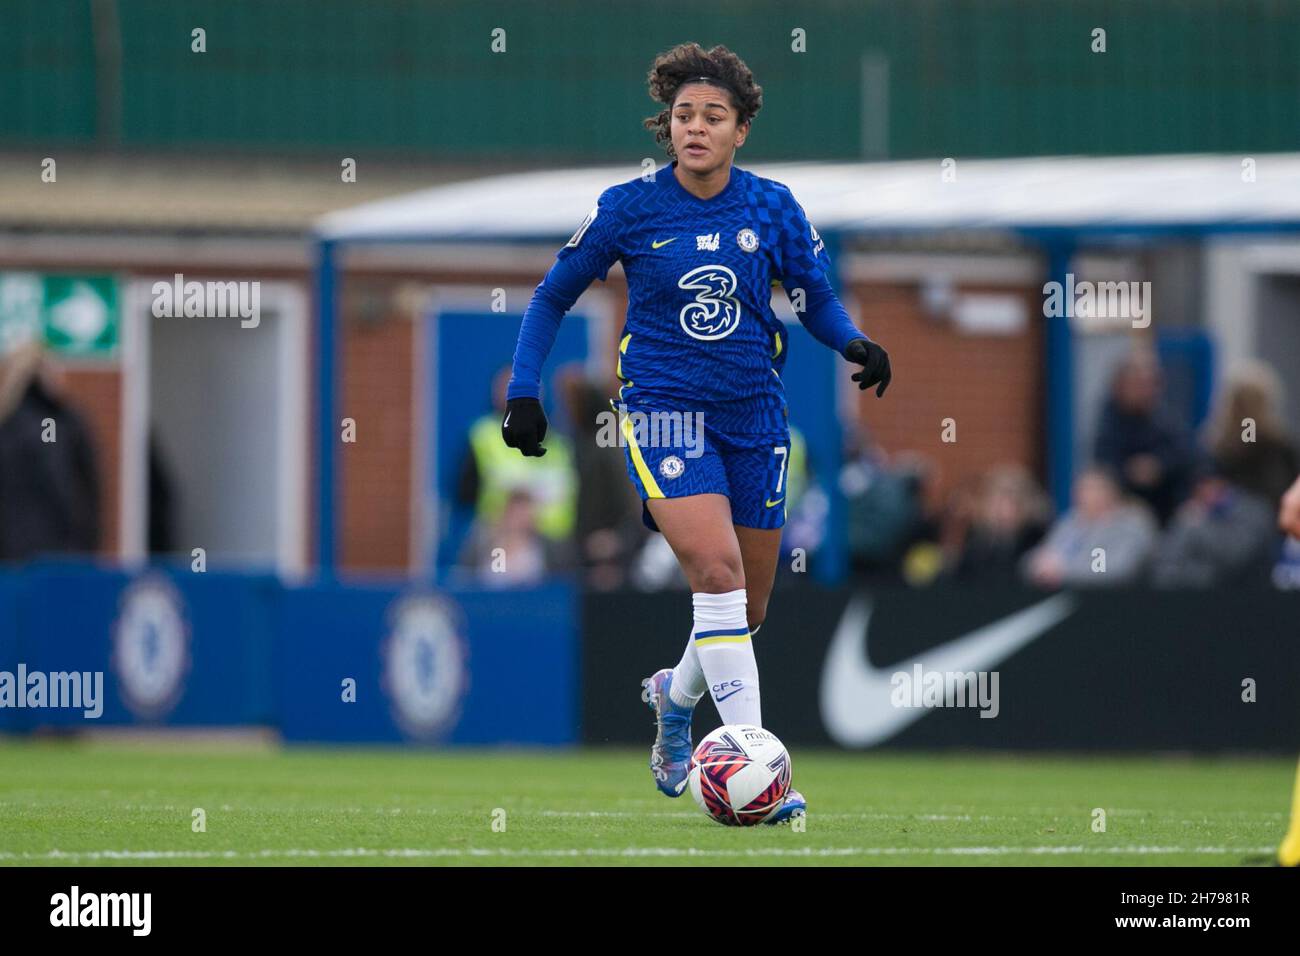 London, UK. 21st Nov, 2021. LONDON, UK. NOVEMBER 21ST : Jessica Carter of Chelsea FC controls the ball during the 2021-22 FA Womens Superleague fixture between Chelsea FC and Birmingham City at Kingsmeadow. Credit: Federico Guerra Morán/Alamy Live News Stock Photo